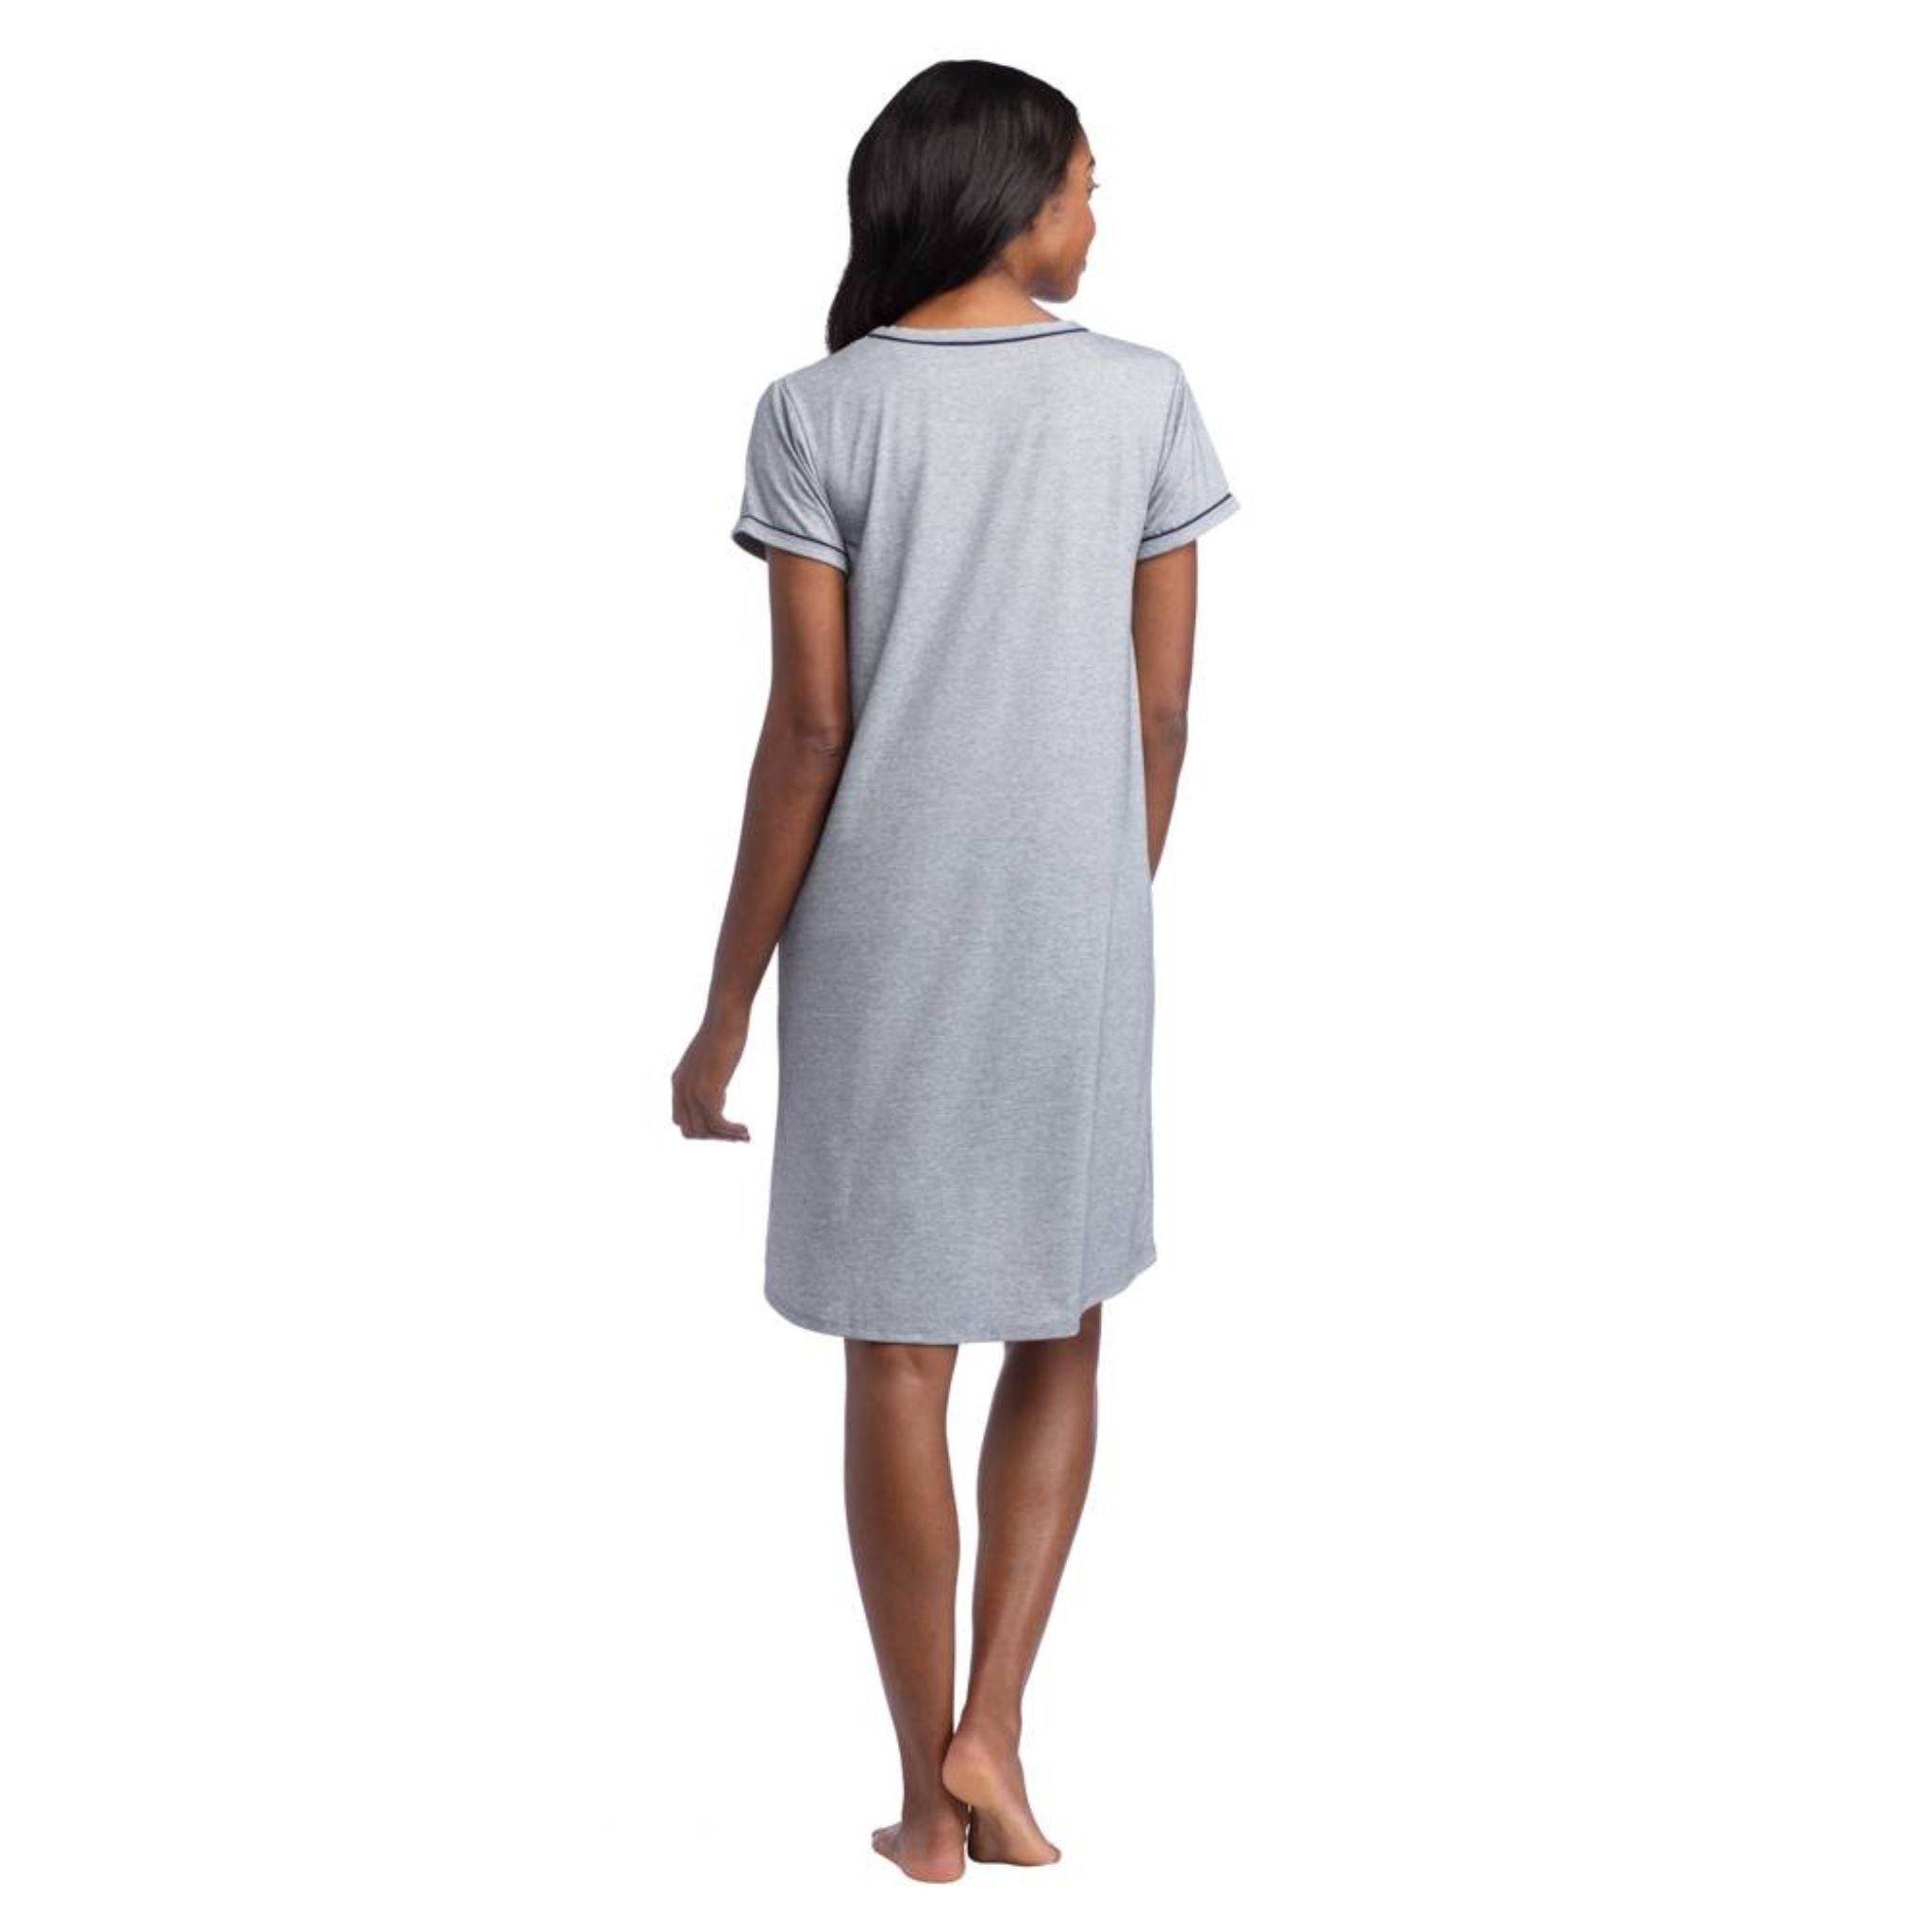 Softies 36” Cali Sleep Shirt with Colored Trim is cozy beyond belief! You’ll fall in love night after night with its elegantly crafted style, including the oh-so-sweet contrast piping on the scoop neckline and short sleeves. It's just-above-the-knee hemline creates a special sway and flow you can't get from an ordinary nightgown. 